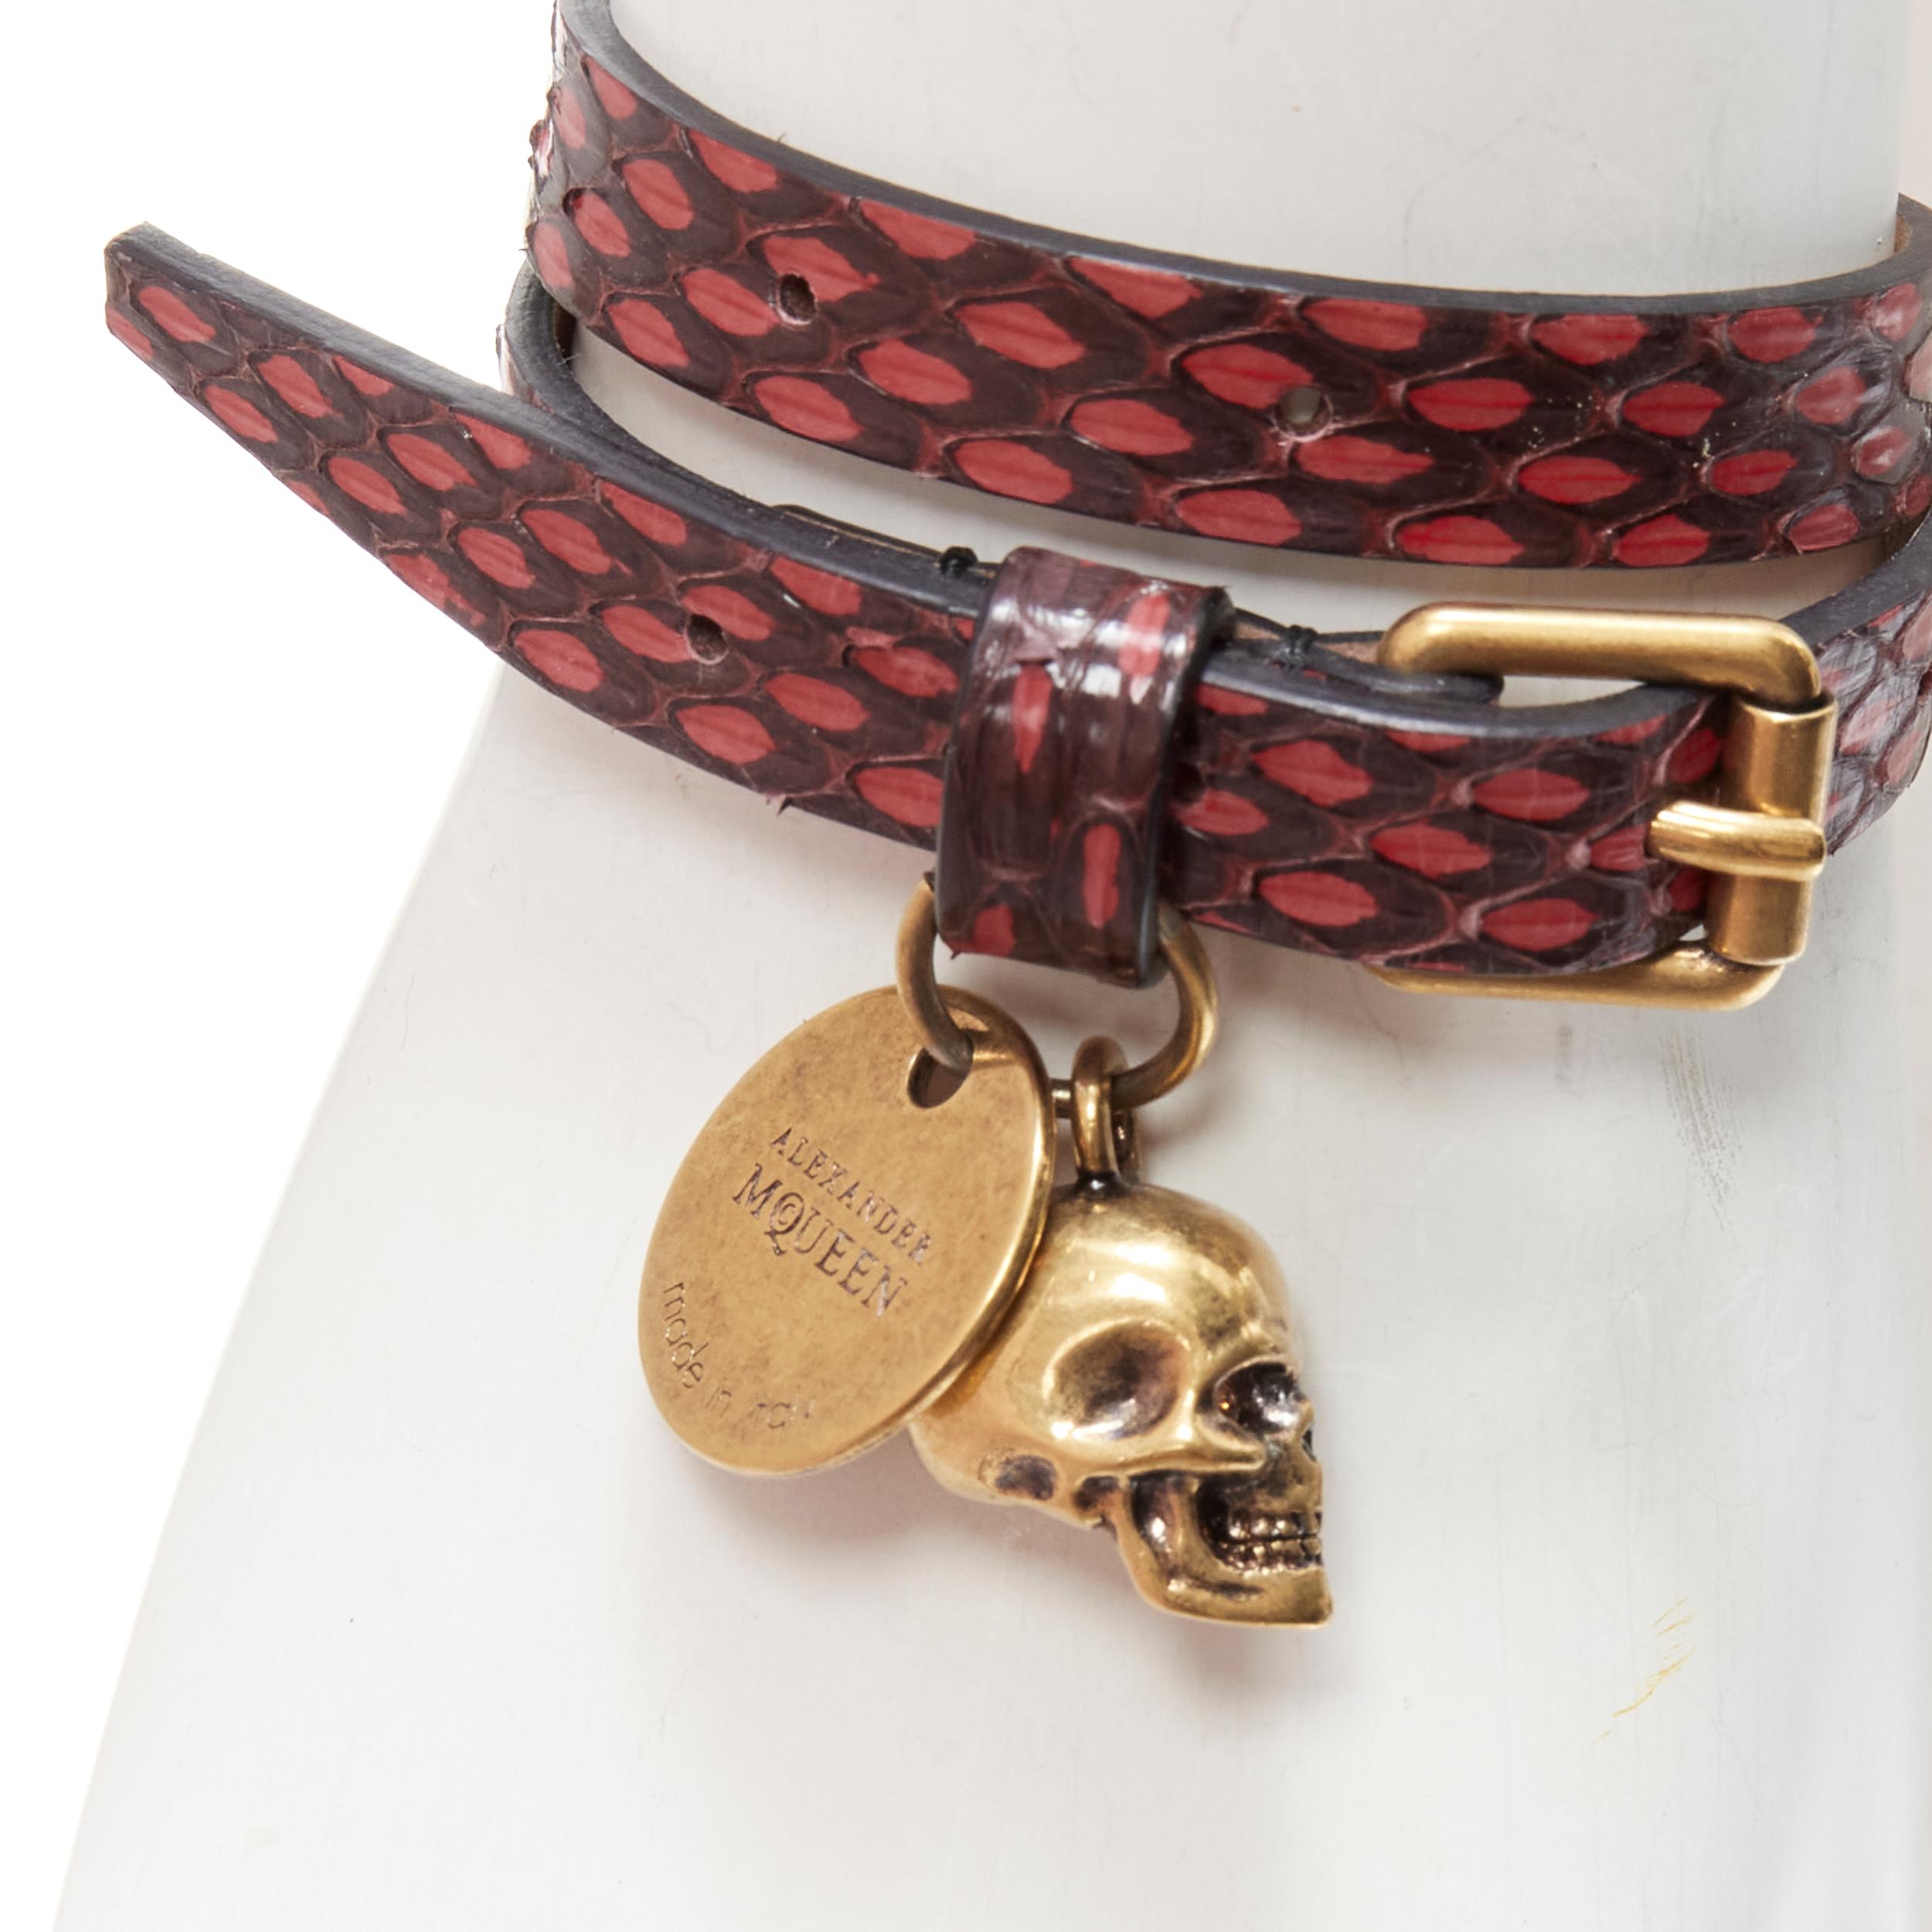 ALEXANDER MCQUEEN red black scaled leather skull charm double wrap bracelet cuff
Brand: Alexander McQueen
Material: Leather
Color: Red
Closure: Buckle
Extra Detail: Antique finished gold-tone hardware. Smallest hole 17cm. Largest hole 37cm.
Made in: